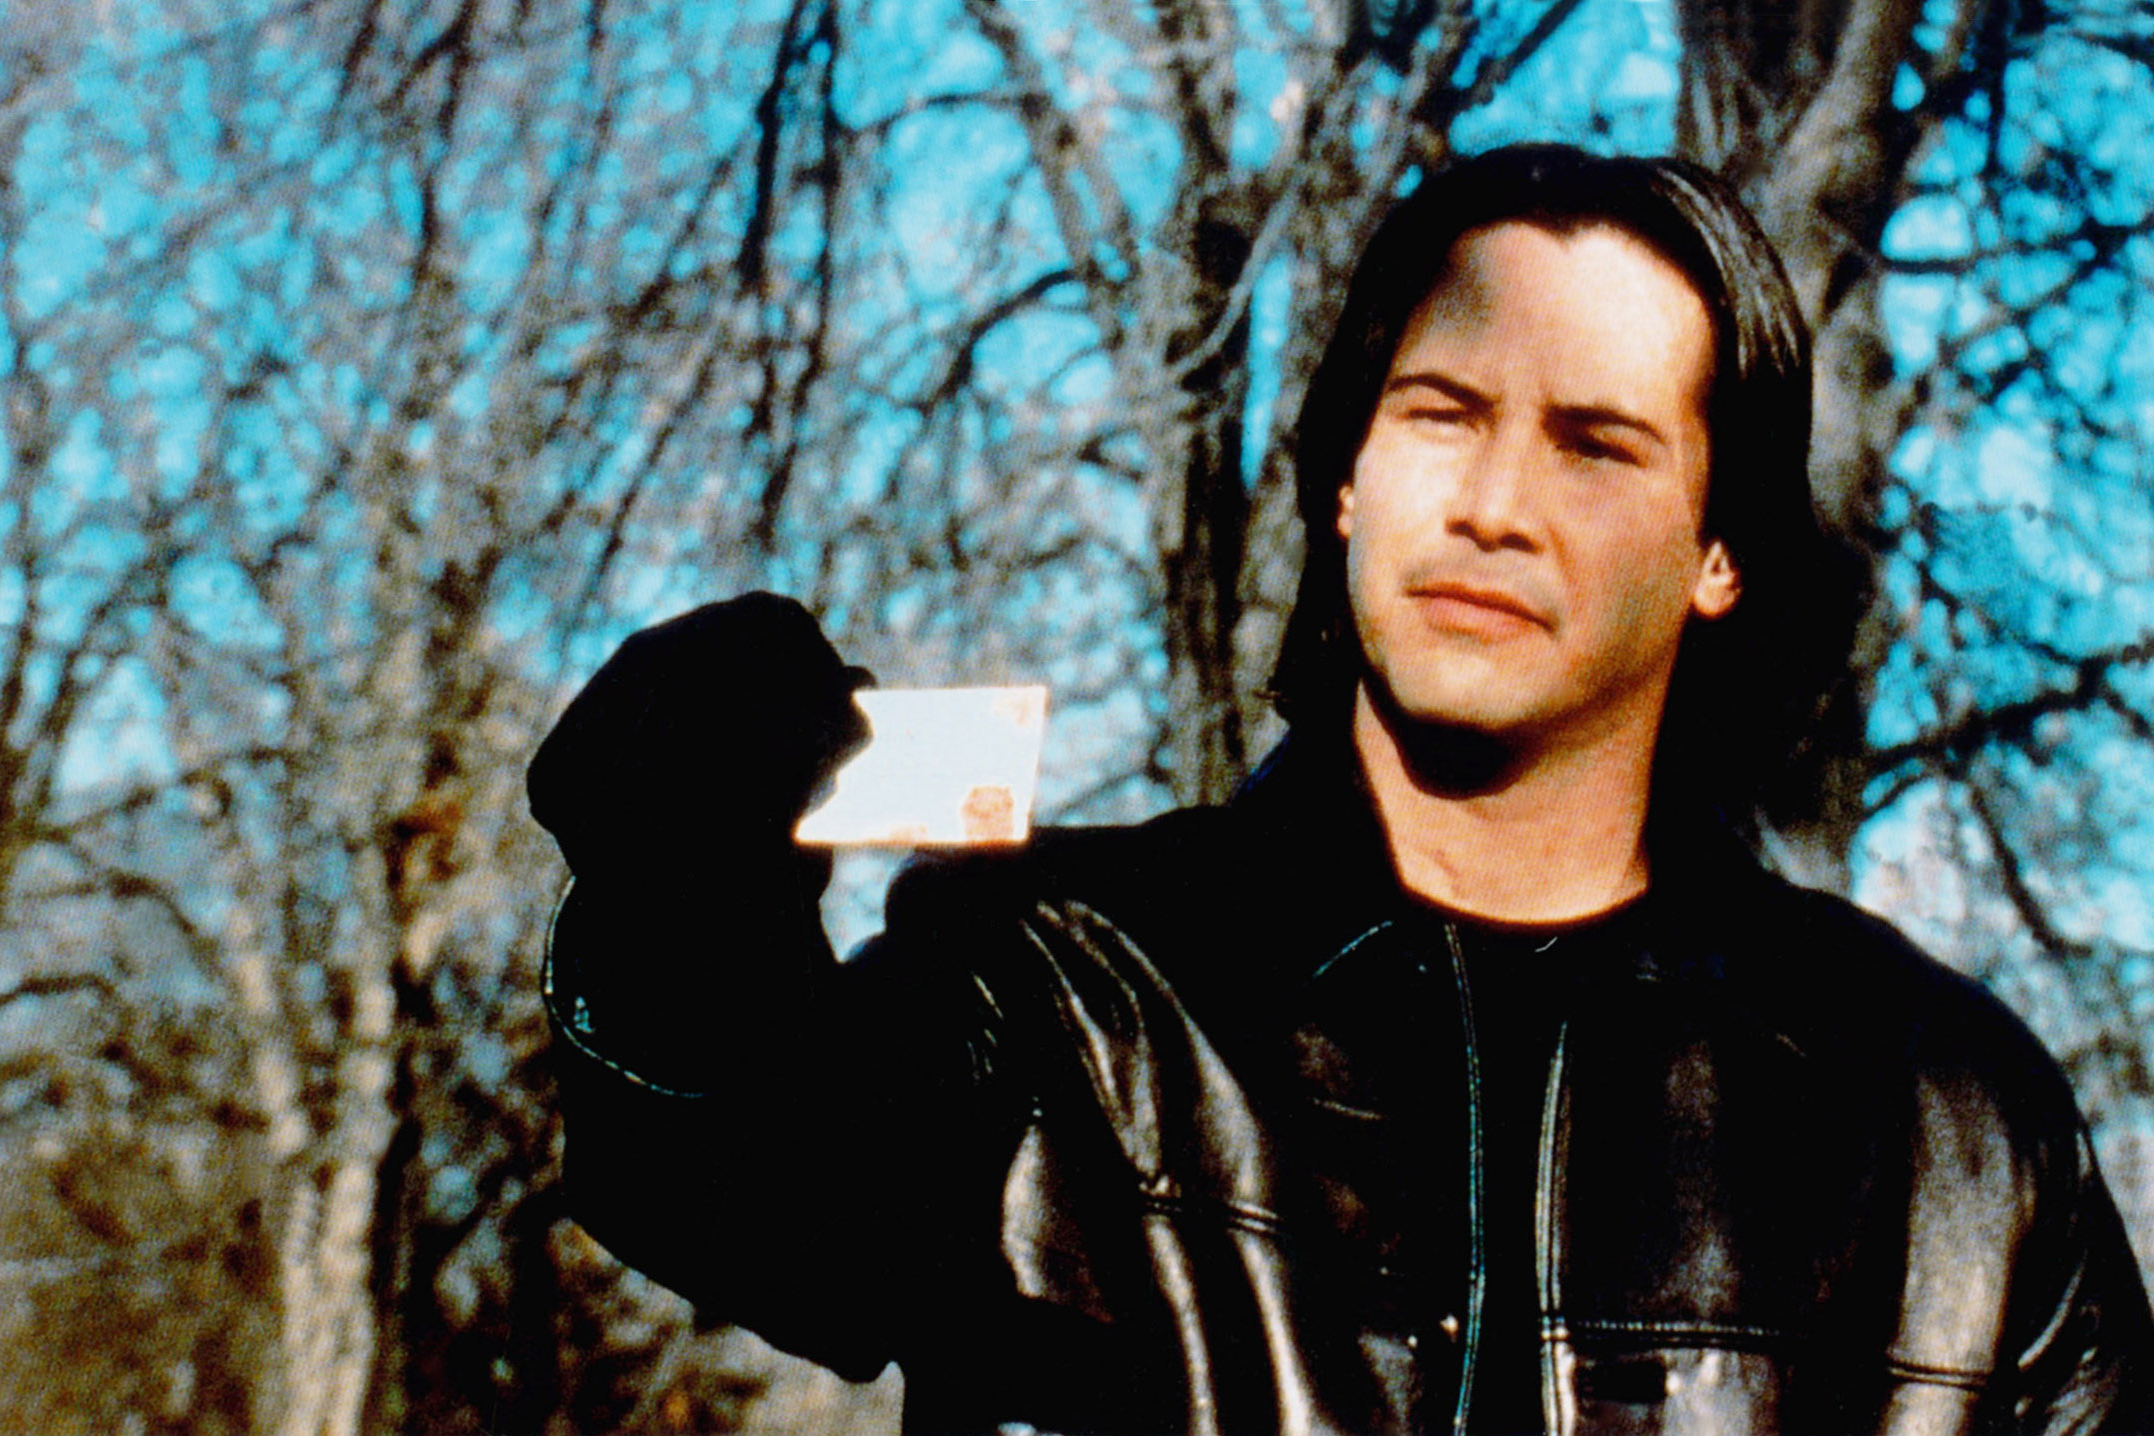 Man in leather jacket holding up a small card with a reflective surface, standing outdoors